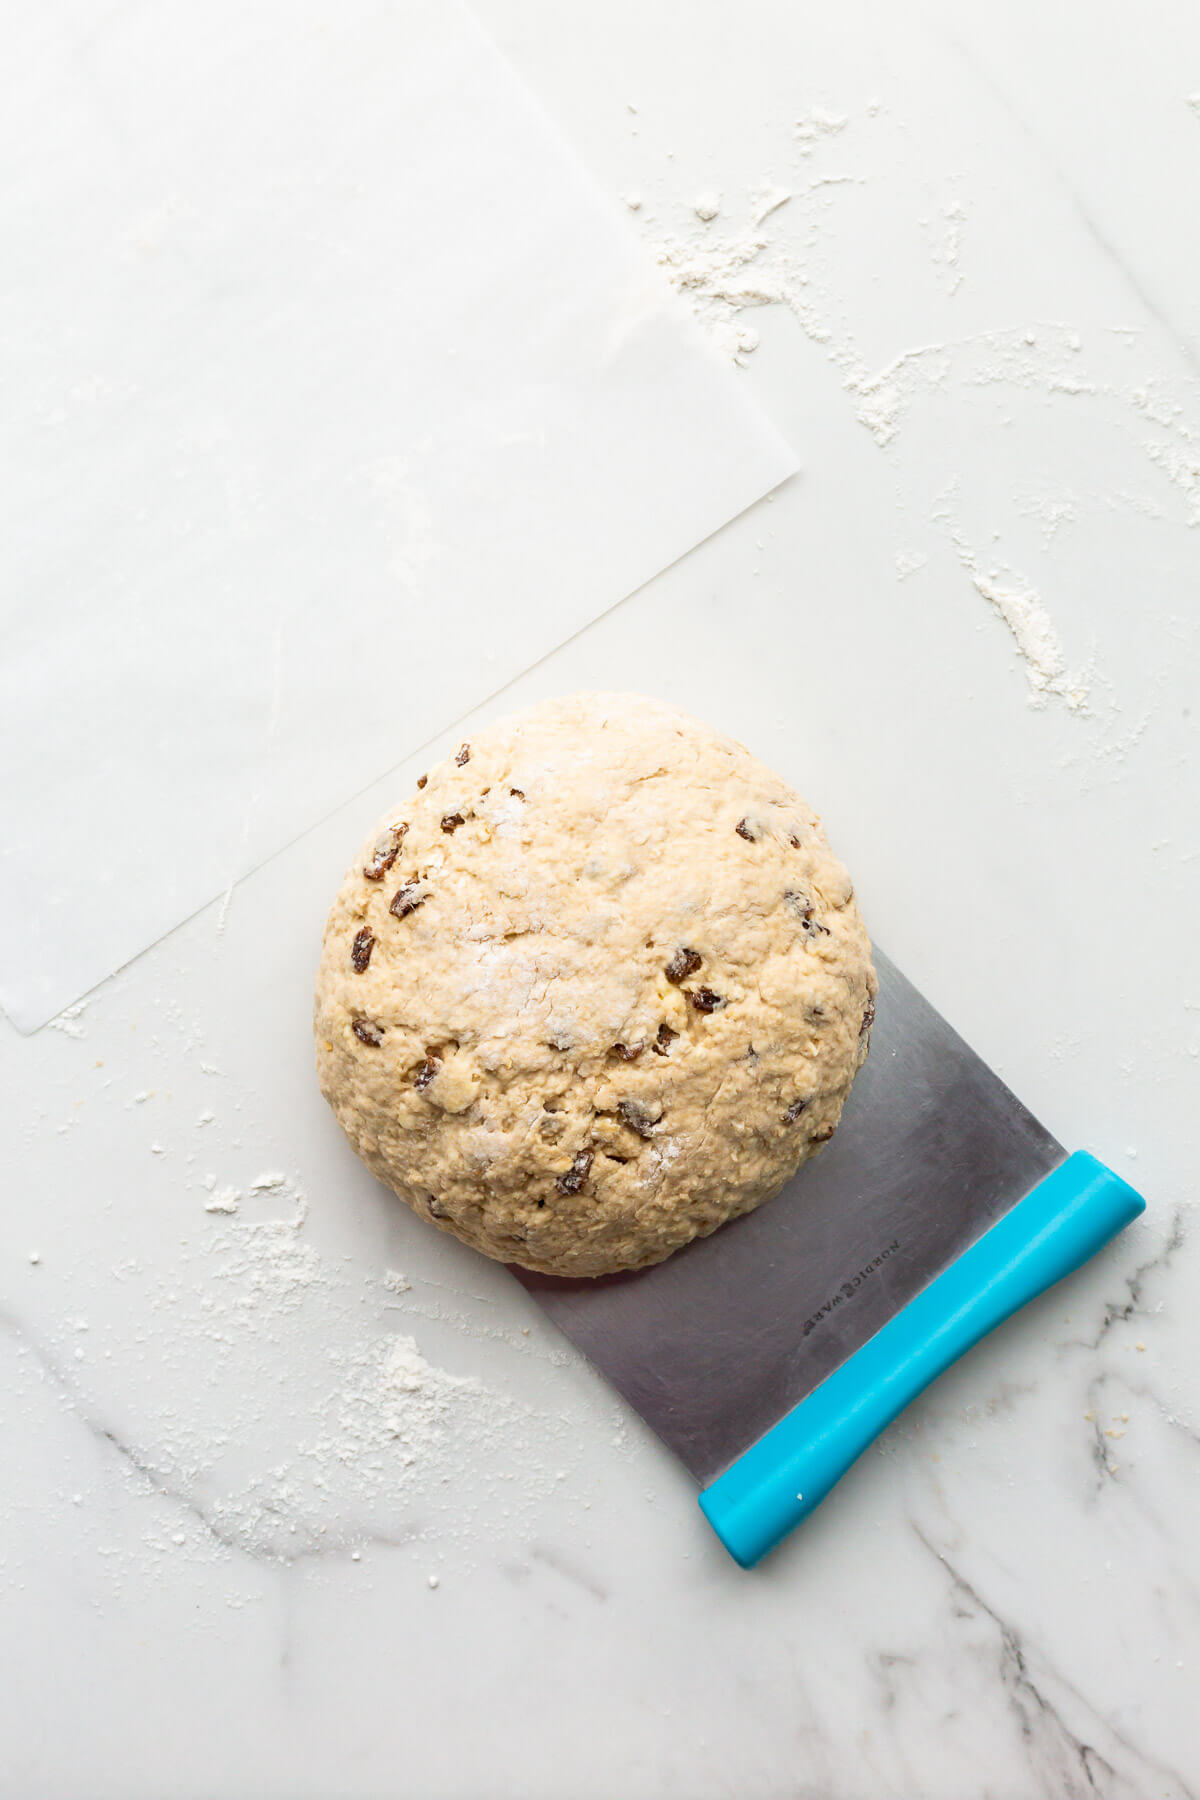 Using a bench scraper to lift sticky Irish soda bread dough to transfer it to a pan to bake it.